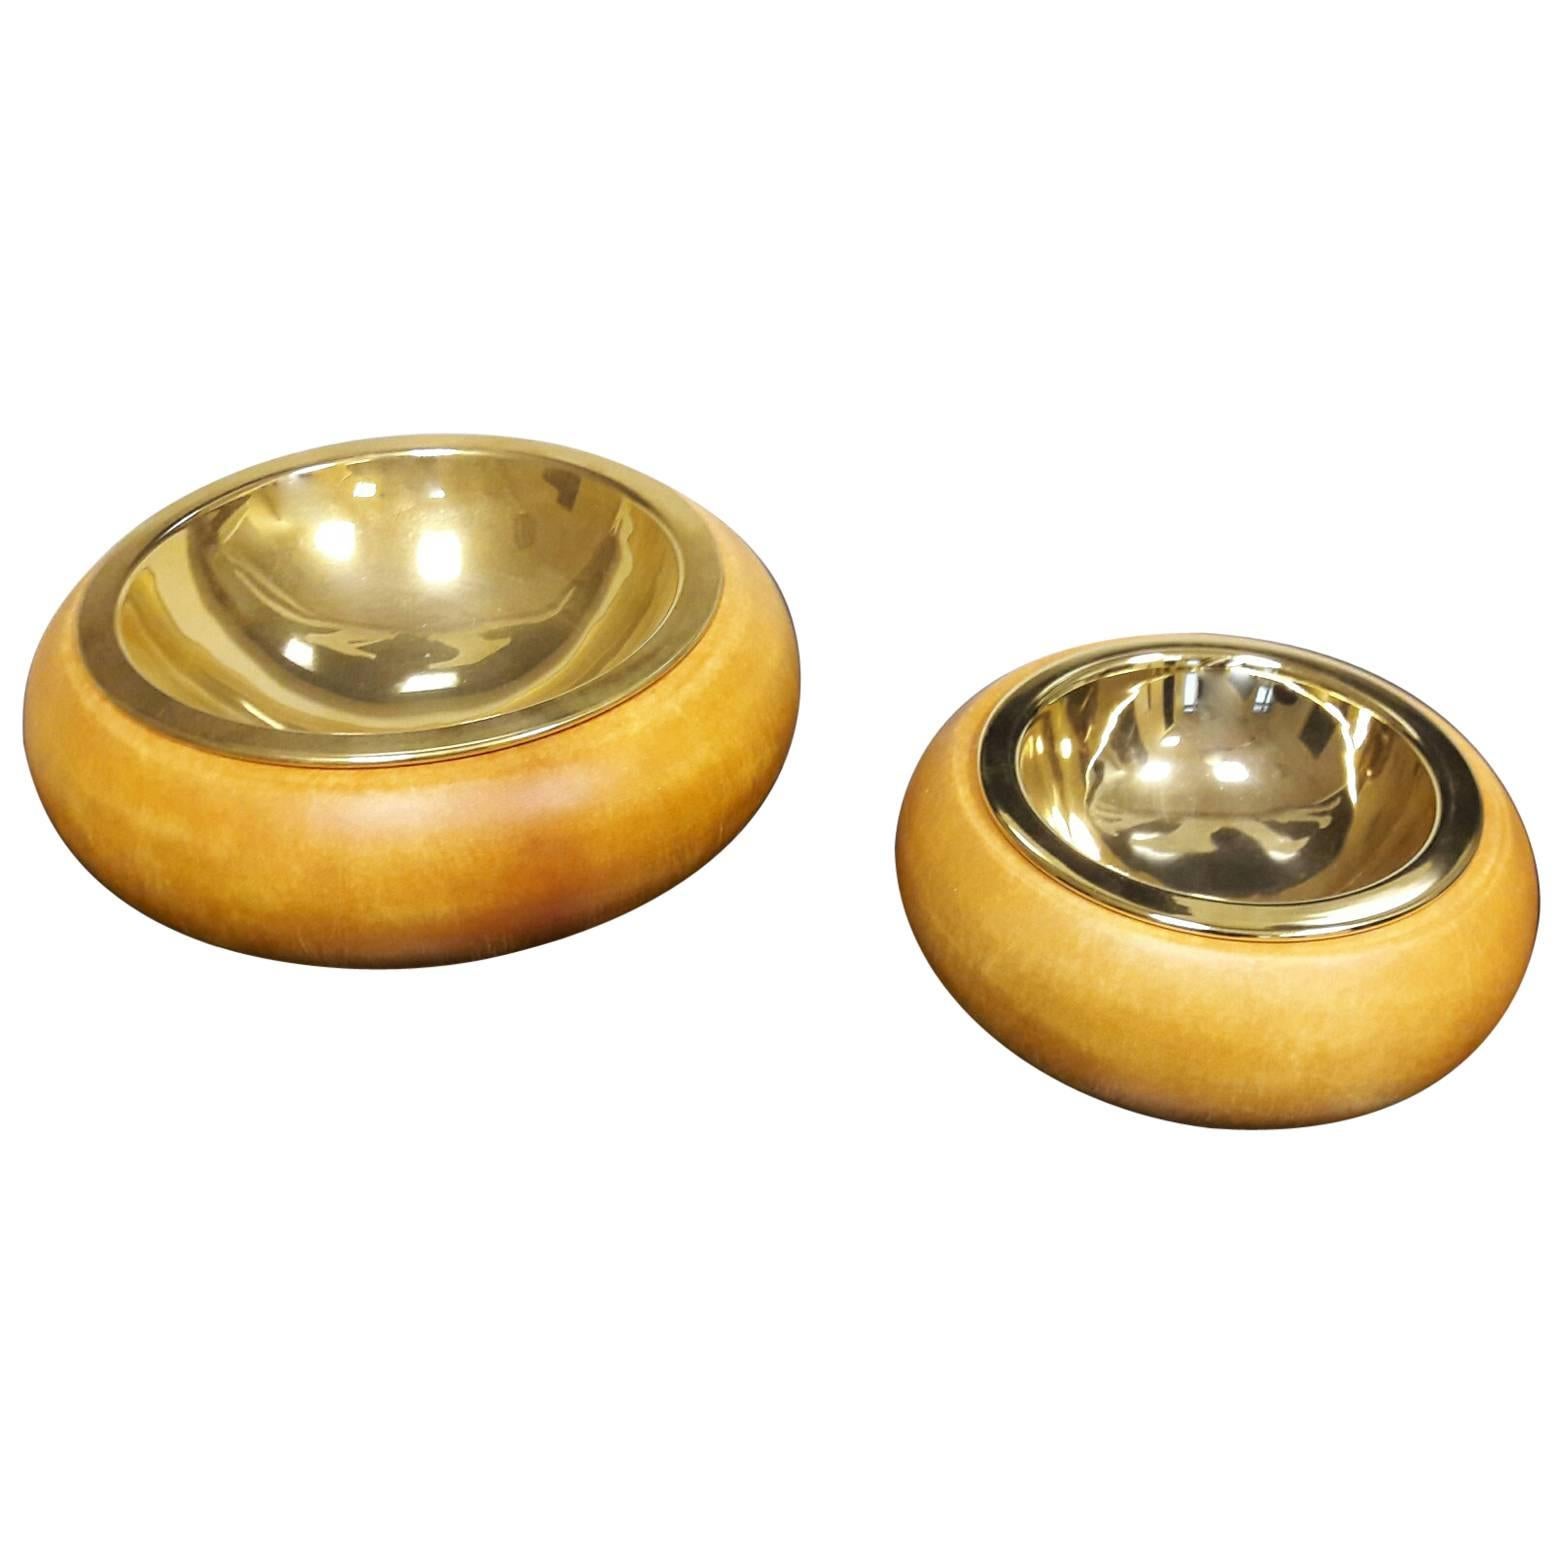 Goatskin Col Ocra Tura Ashtrays or Candies Bowl, Set of Two For Sale